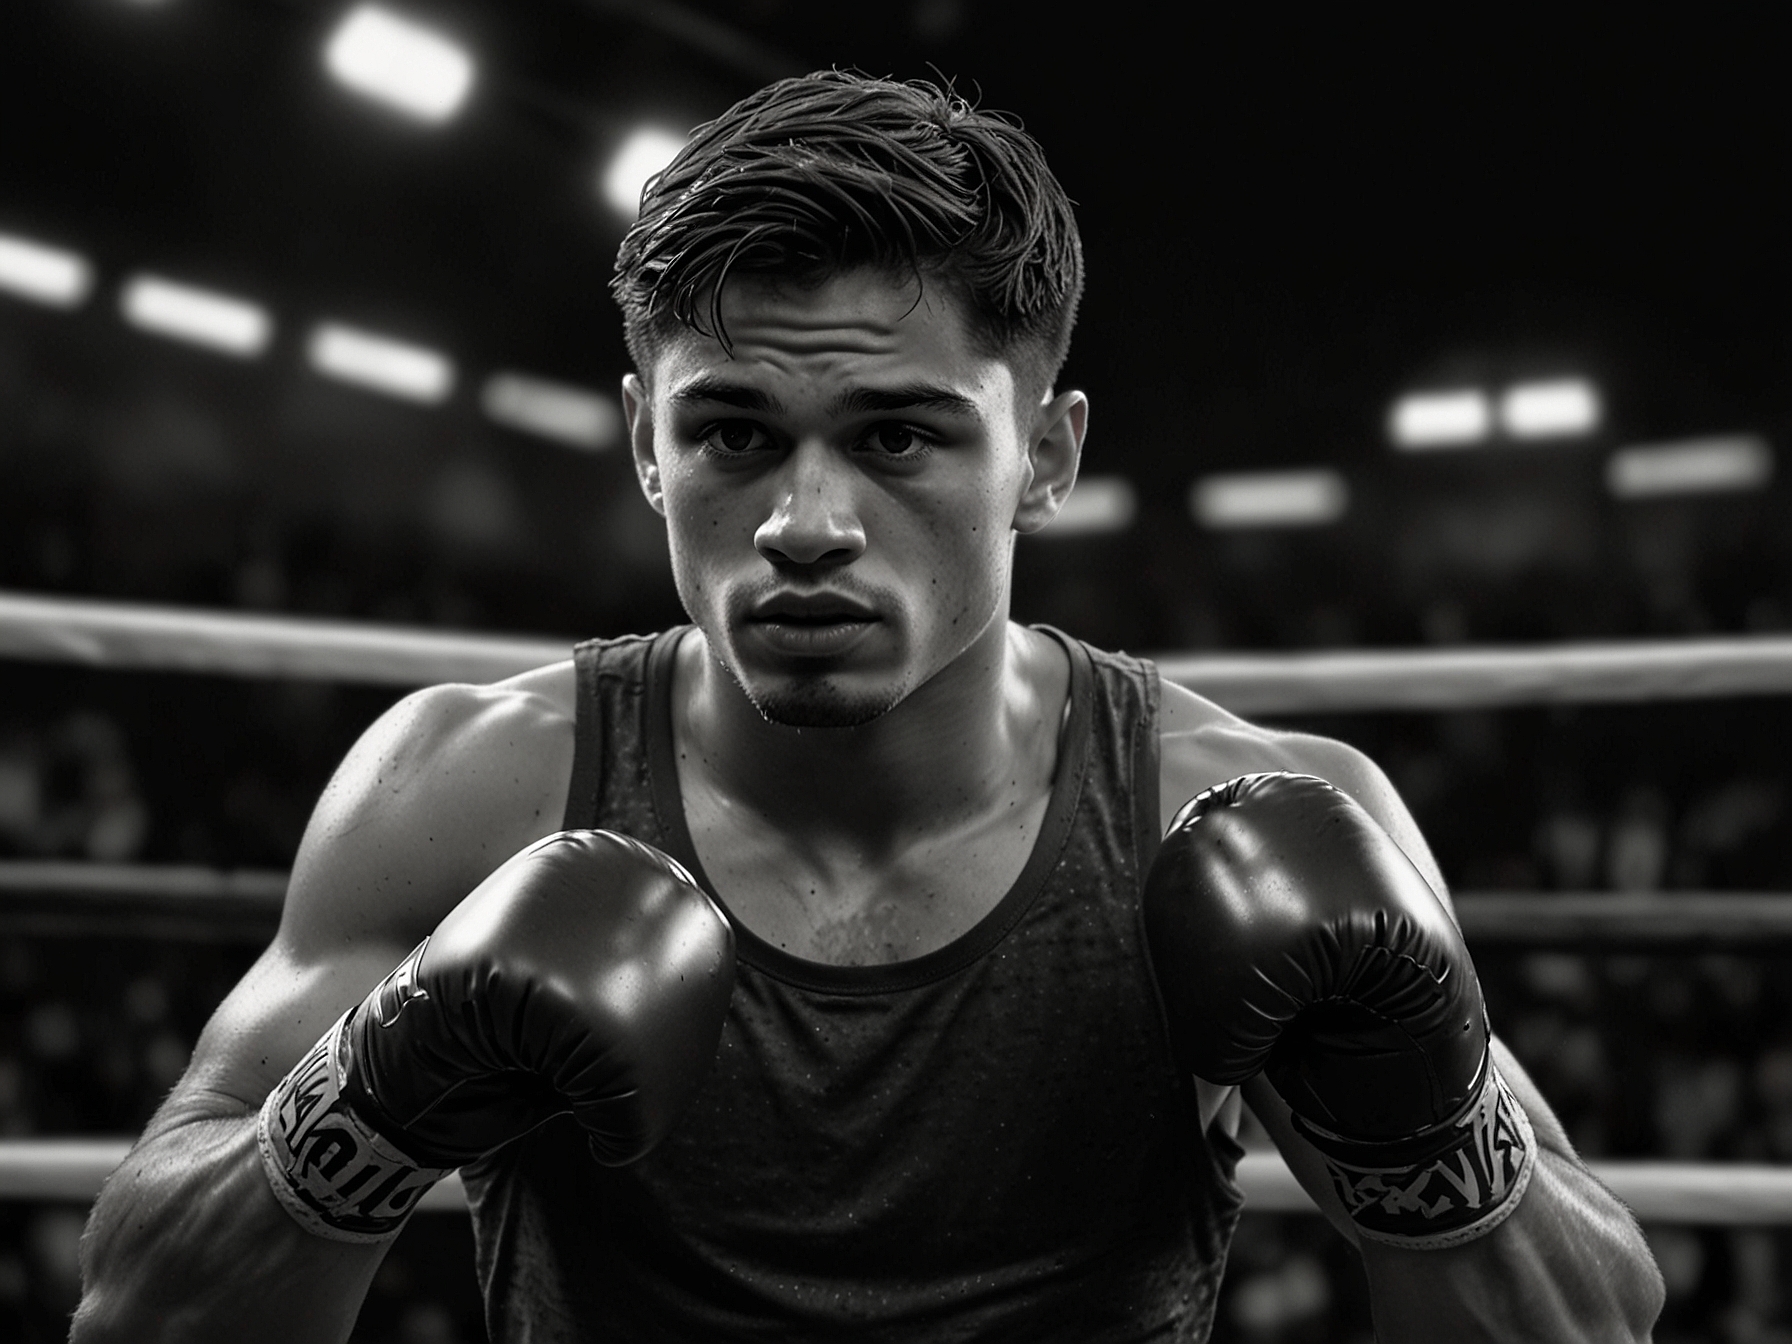 Ryan Garcia in a boxing ring, showcasing his speed and power during a match, capturing the moments that made him a household name in boxing before his retirement.